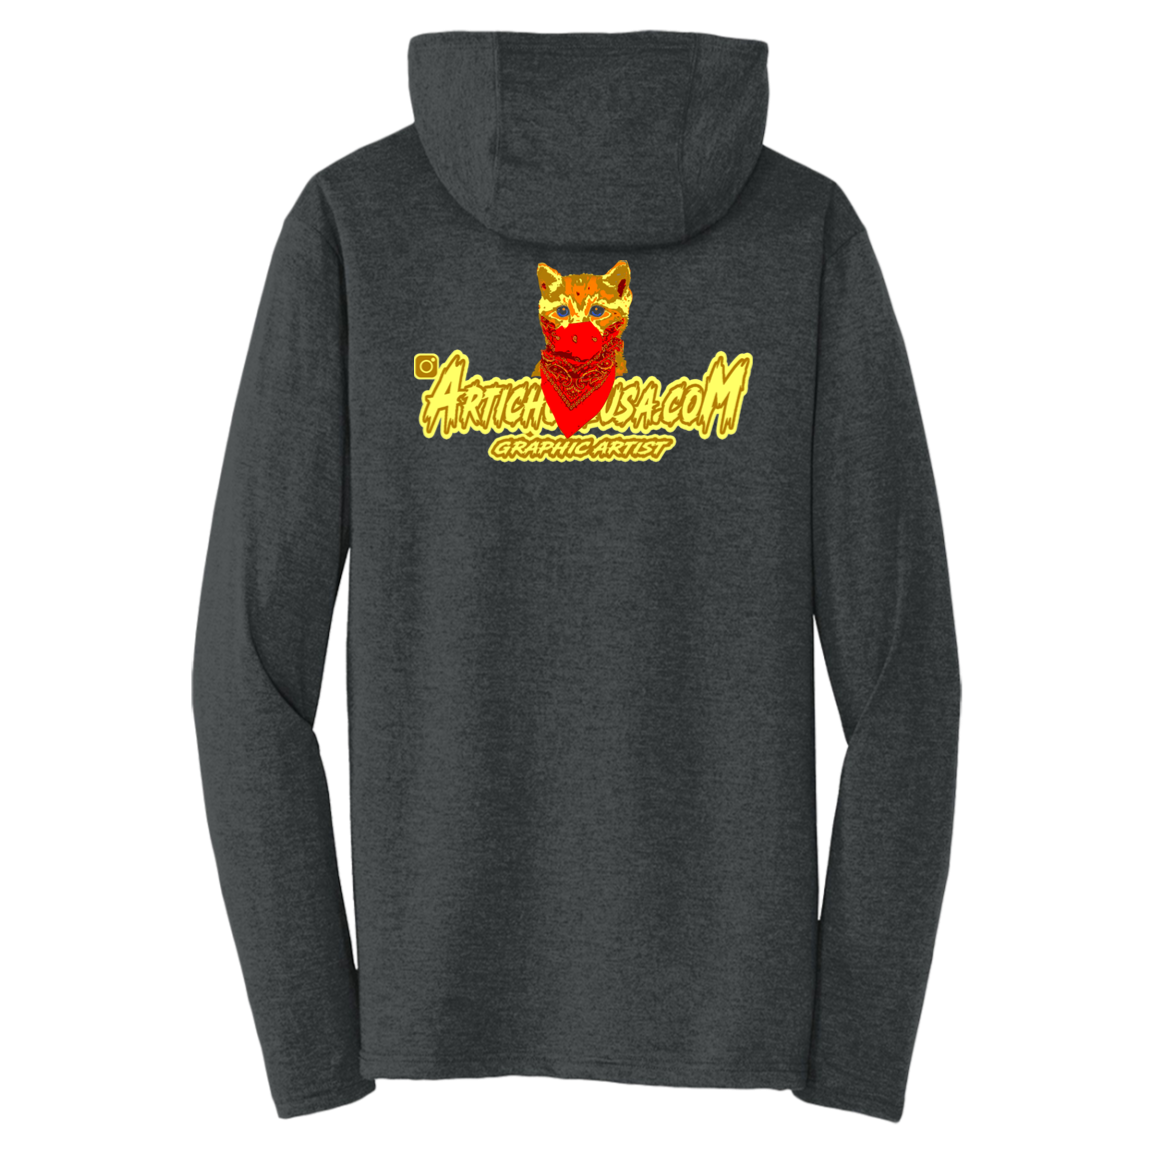 ArtichokeUSA Custom Design. You've Got To Be Kitten Me?! 2020, Not What We Expected. Triblend T-Shirt Hoodie